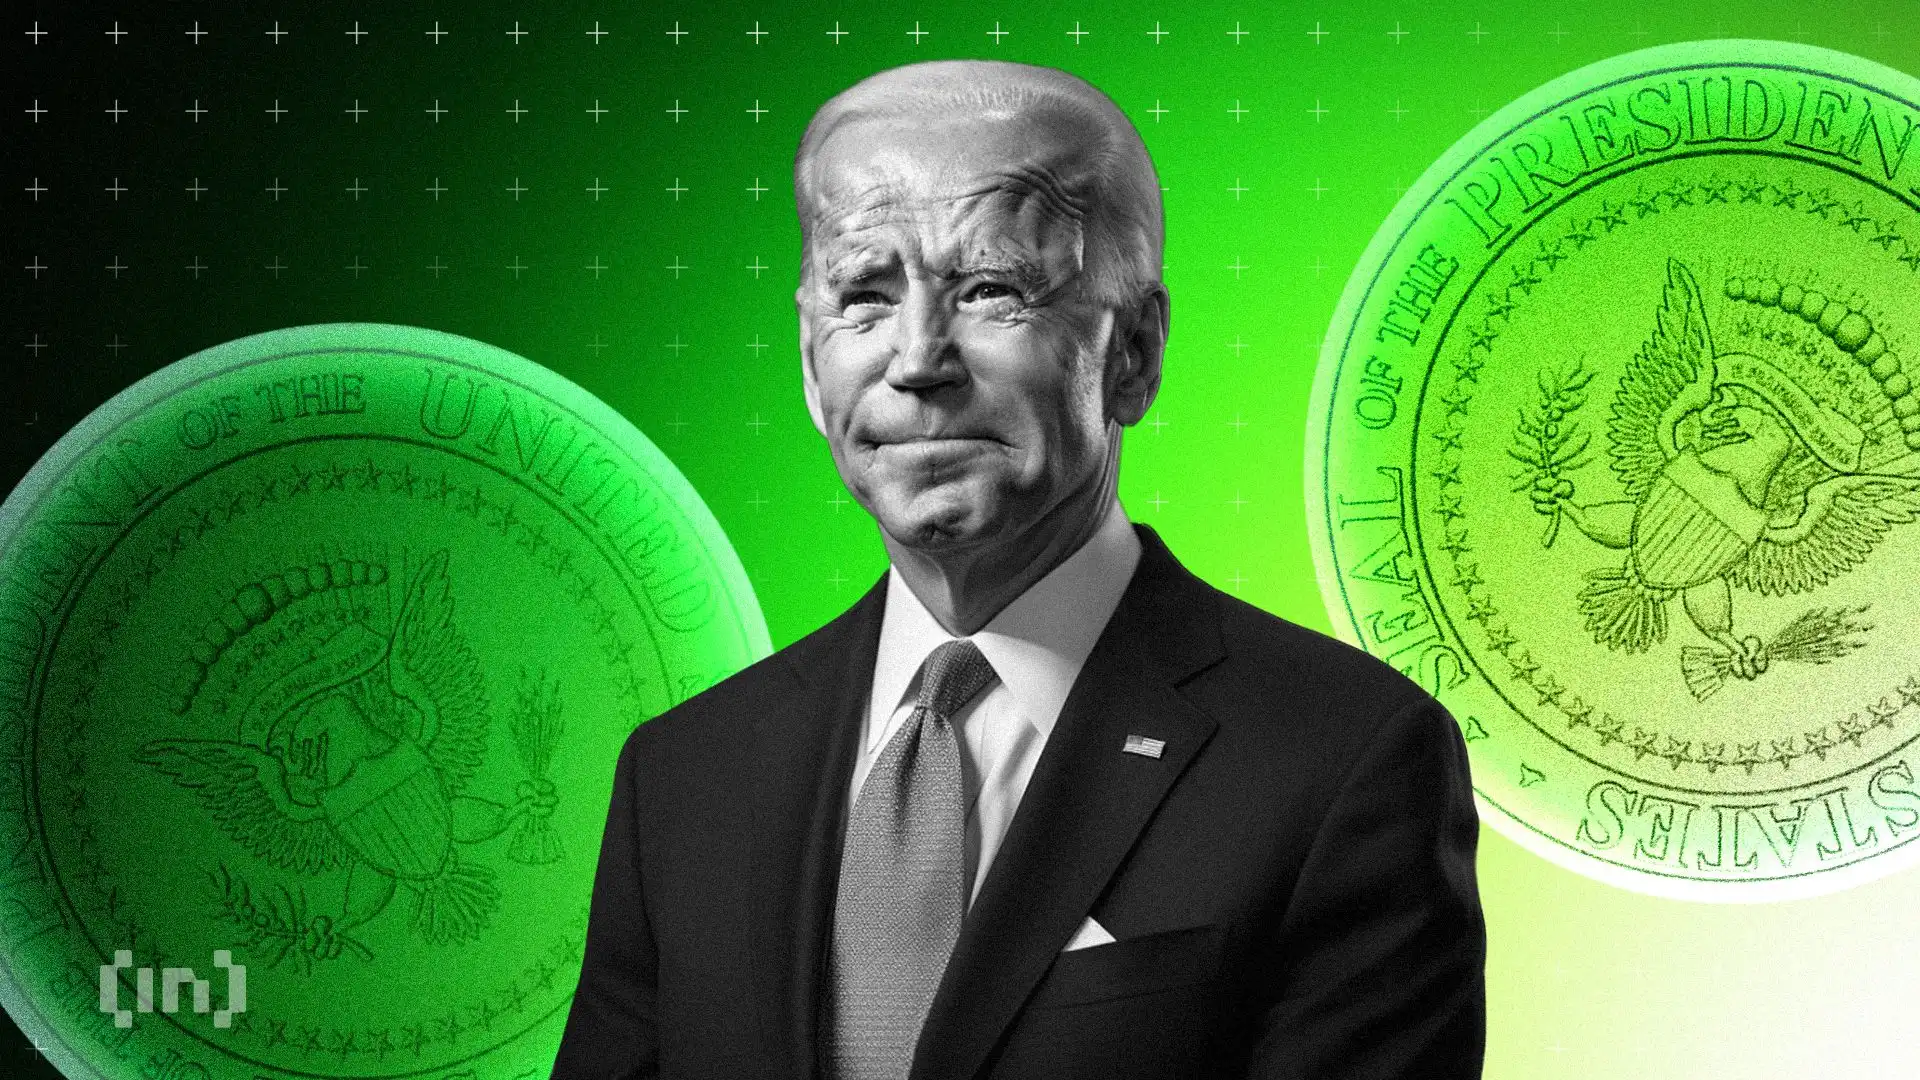 Impact of President Biden on Crypto Markets: Mixed Views from Experts